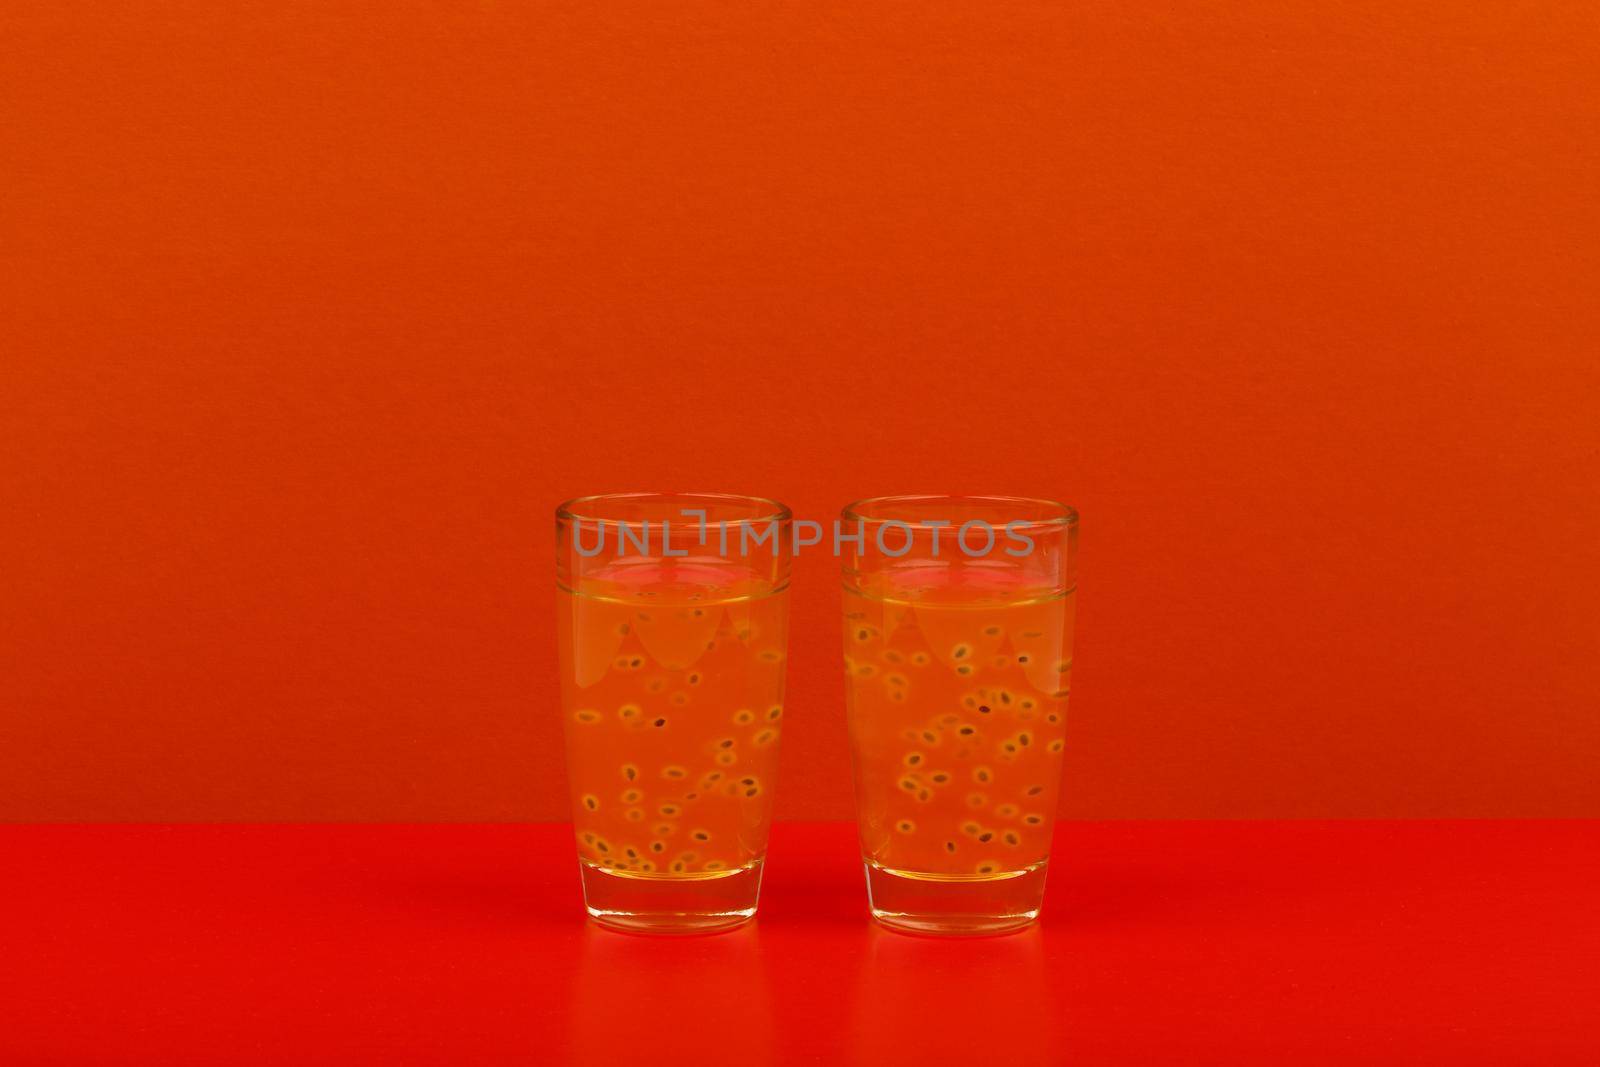 Minimalistic still life in vivid colors with two shots with fruit drink on red table against red background with copy space. 